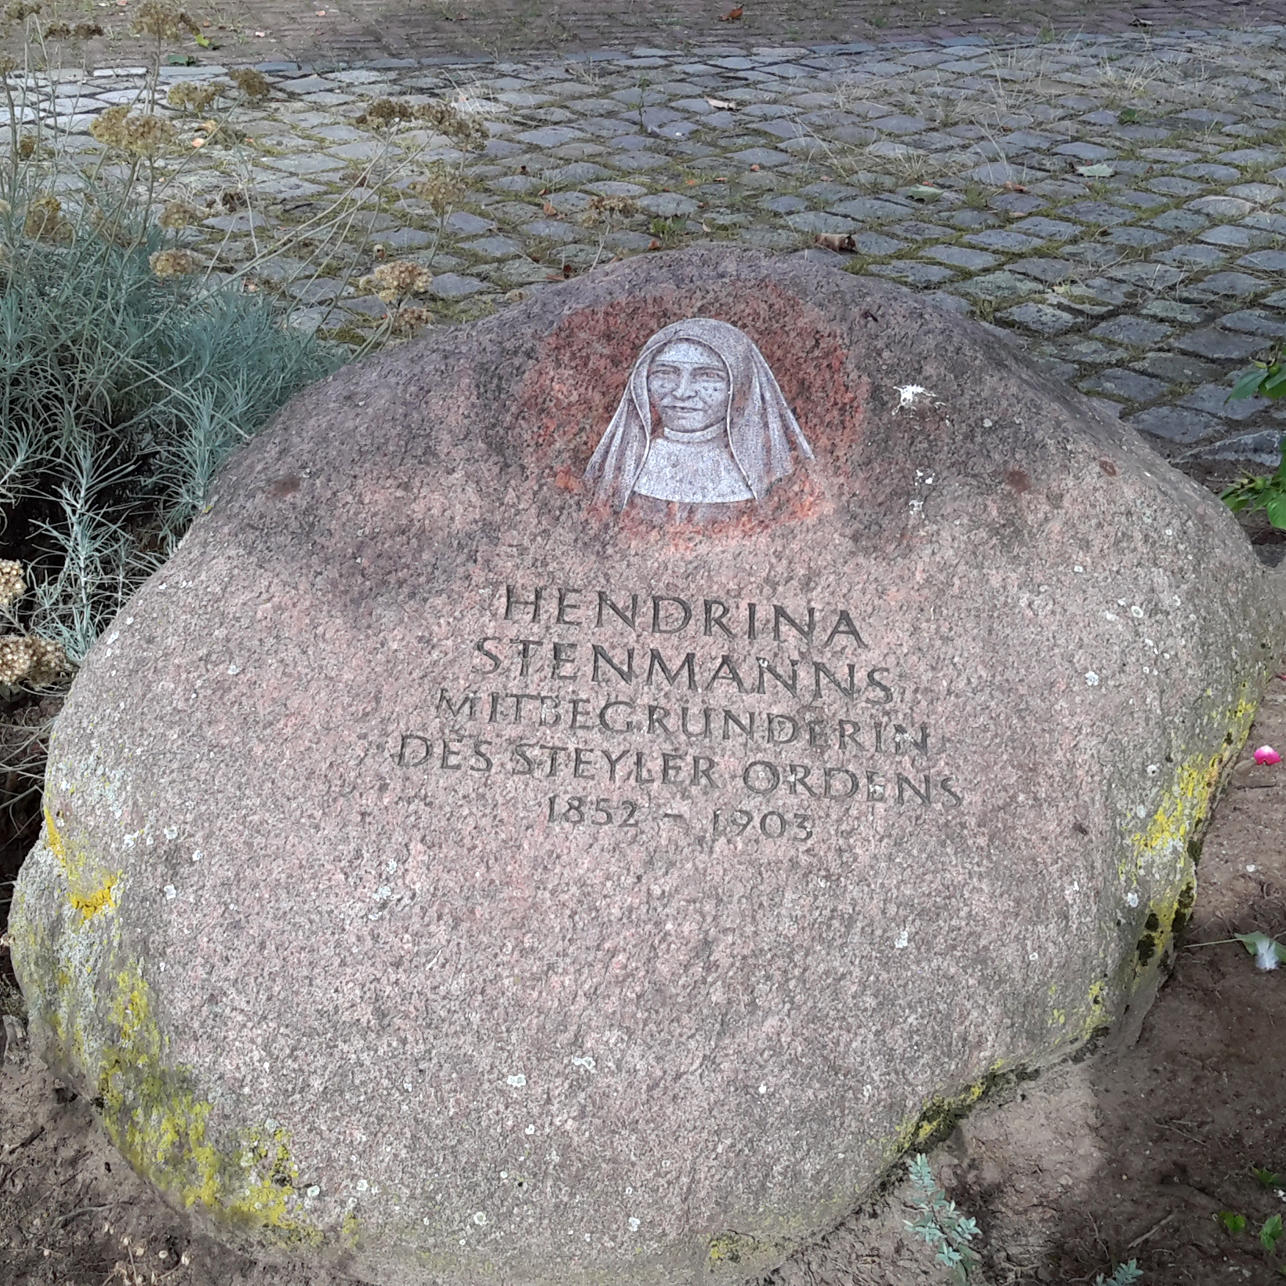 Monumental Stone to Mother Josepha, in the Garden of St Nicholas Parish, in Issum